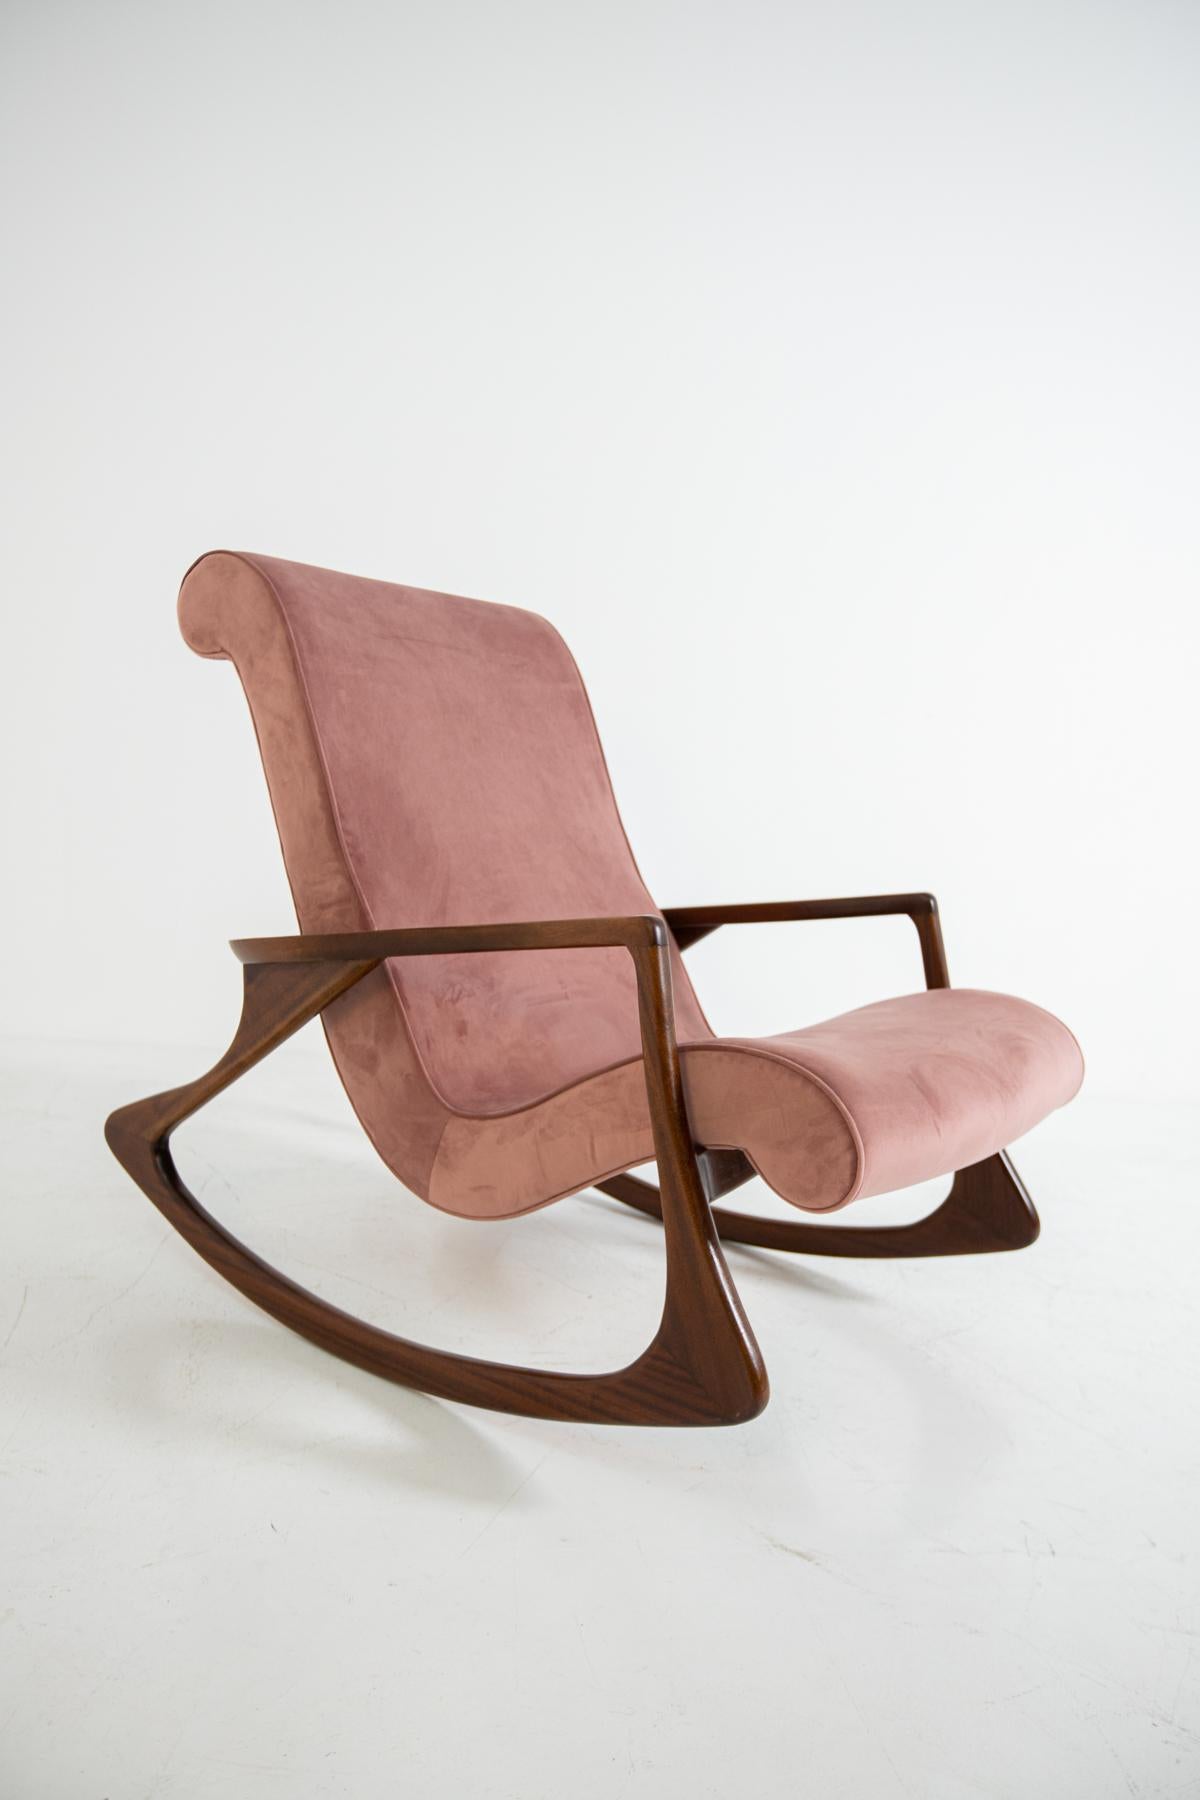 Elegant and sculptural midcentury American rocking chair. The armchair has been restored and refreshed in an elegant antique pink velvet. The seat and its back are one piece to give comfort to its guest. Its frame is made of walnut wood. Its fluid